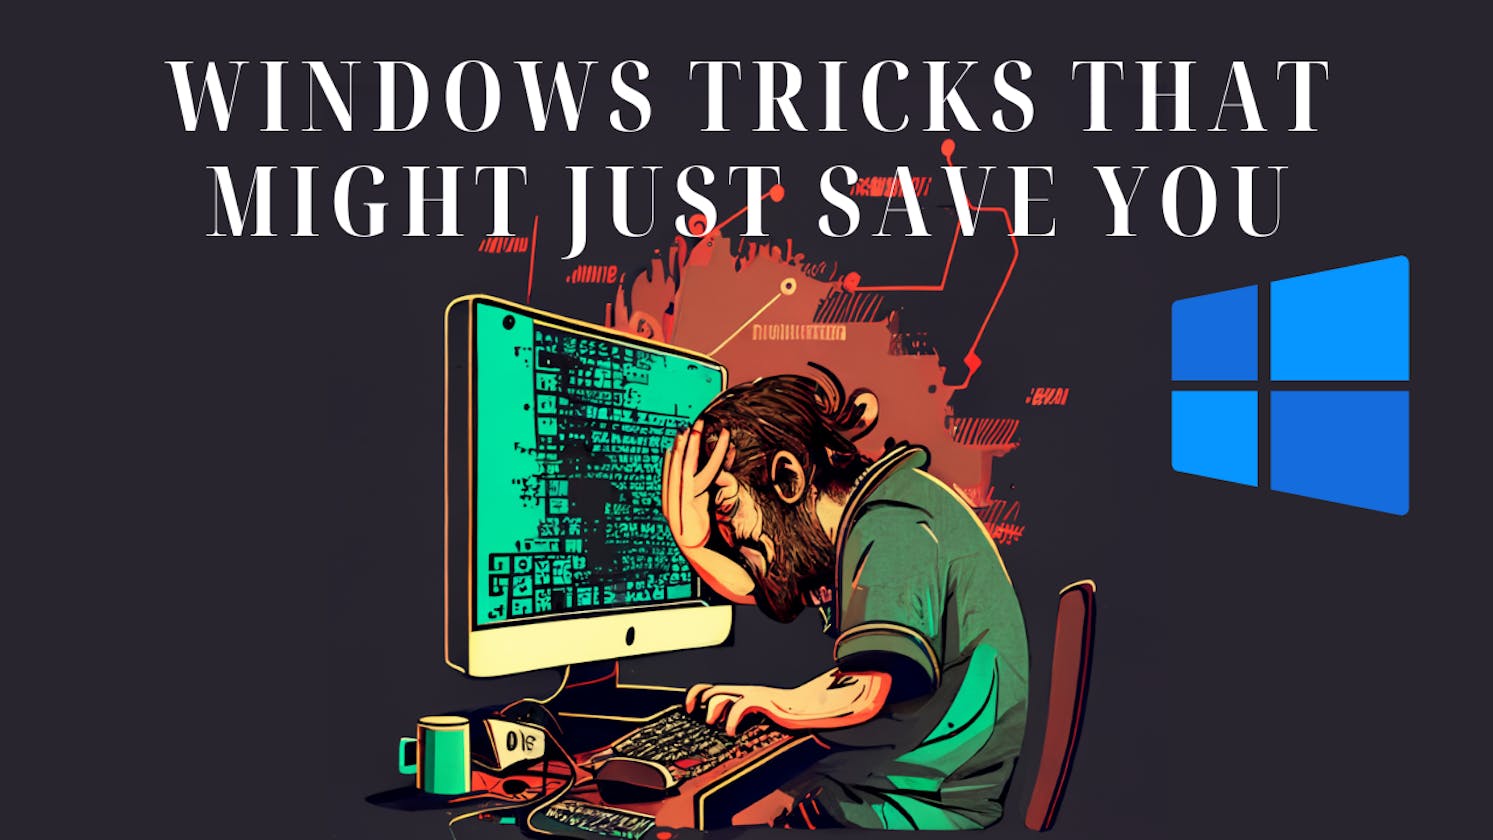 Windows tricks that might just save you